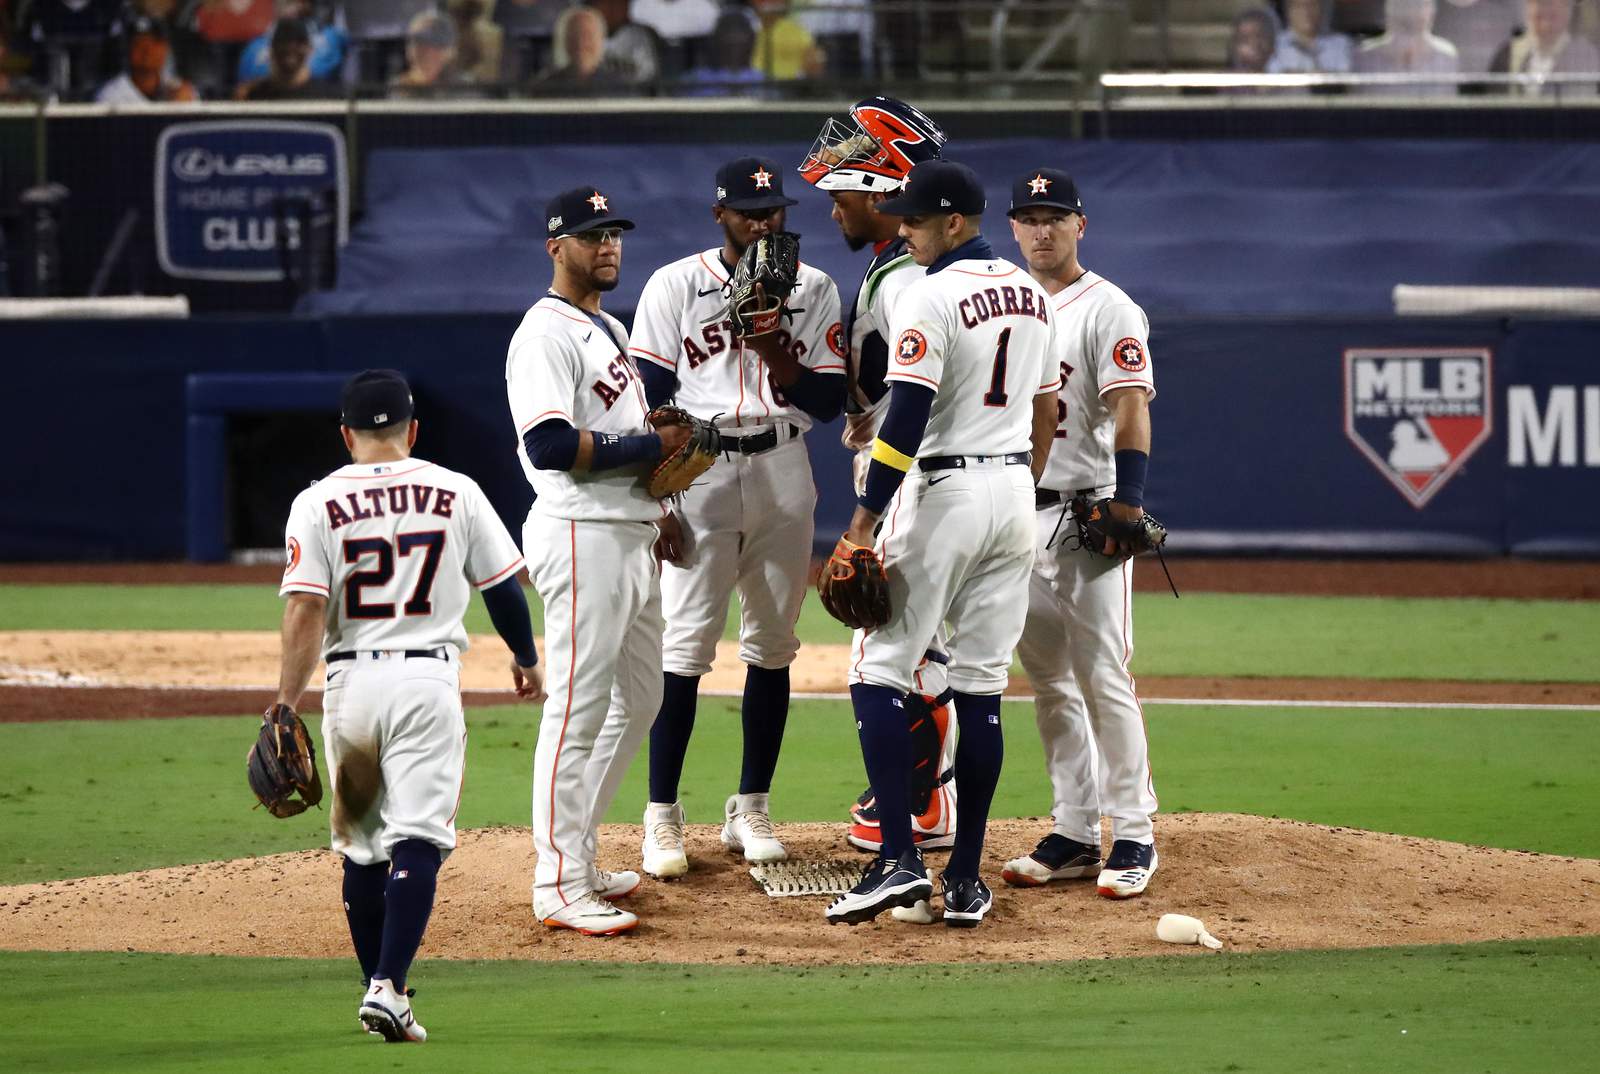 Astros fall to Rays 5-2 in Game 3 of ALCS, trail series 3-0